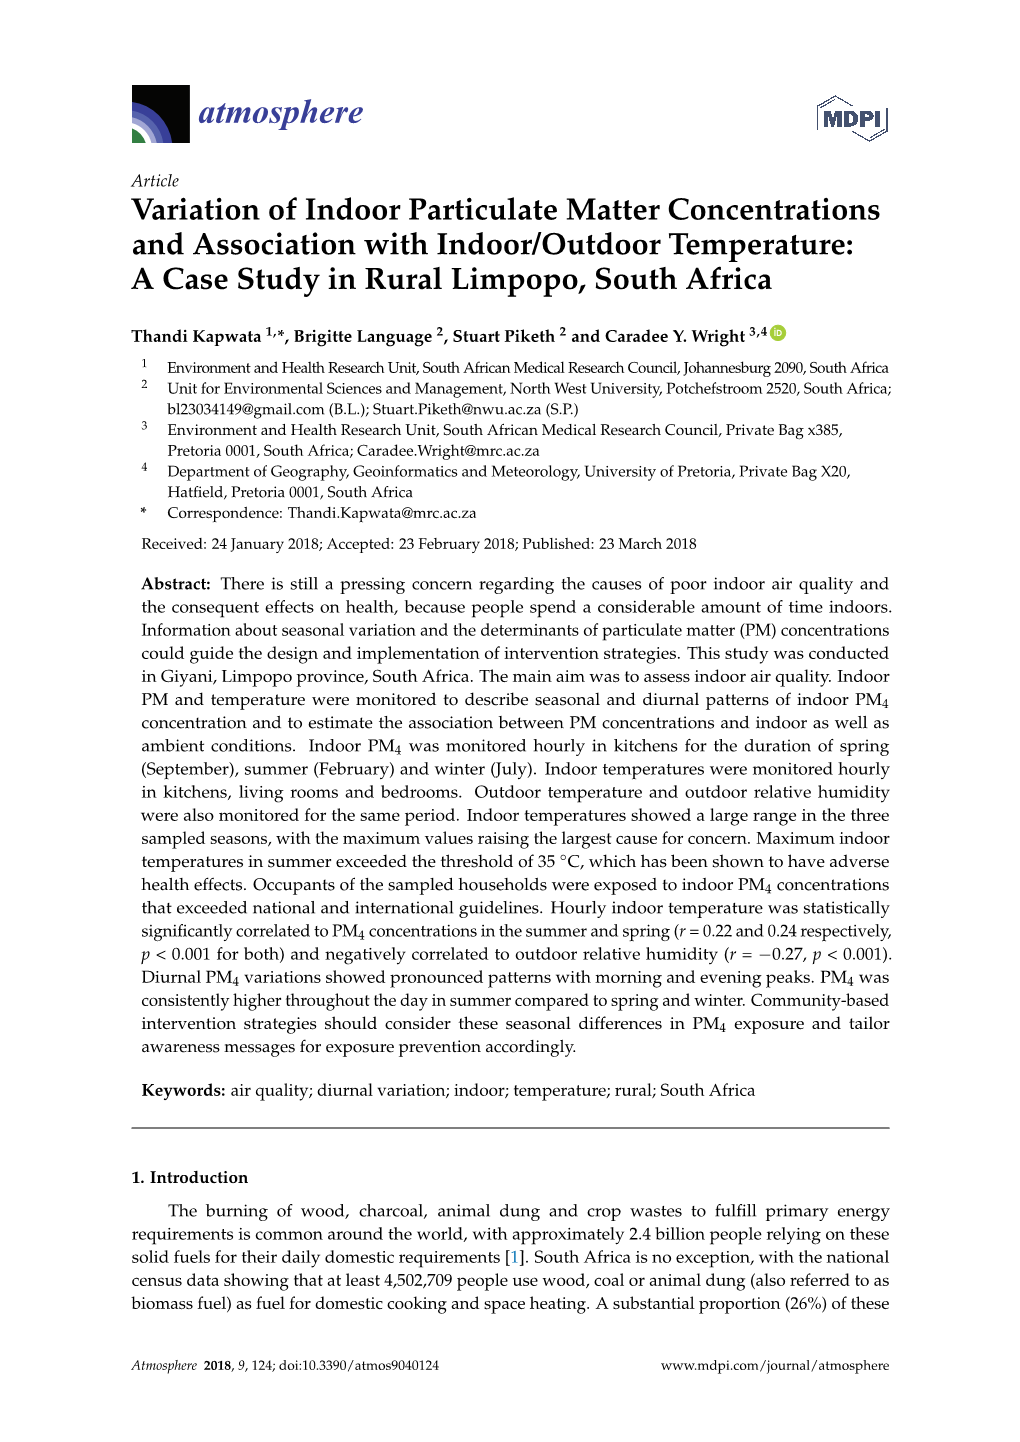 Variation of Indoor Particulate Matter Concentrations and Association with Indoor/Outdoor Temperature: a Case Study in Rural Limpopo, South Africa